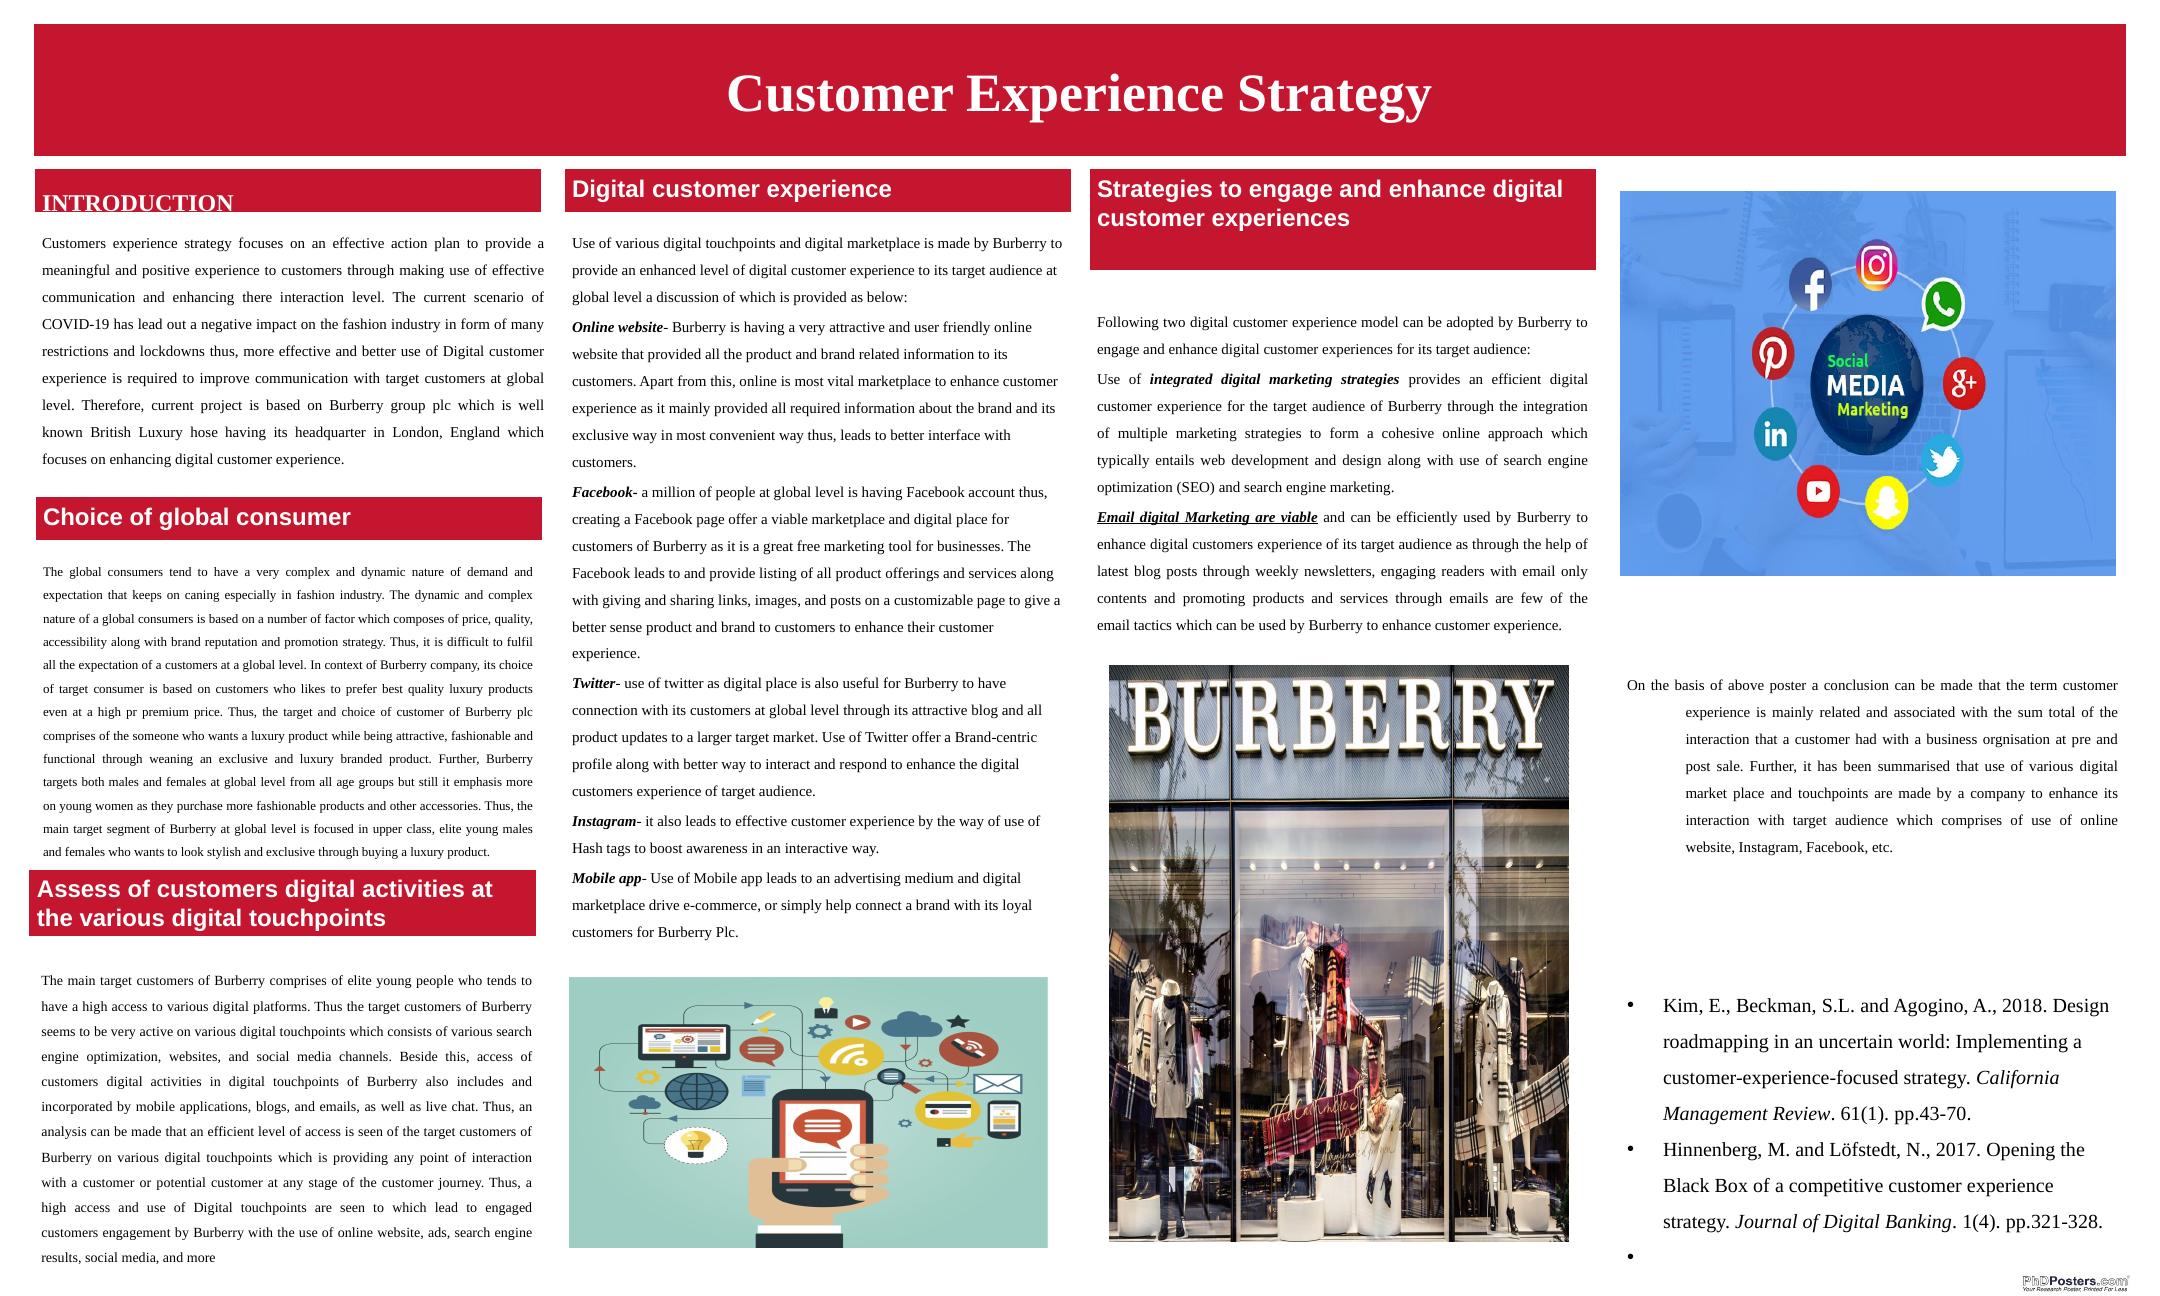 Digital Customer Experience Strategy for Burberry_1